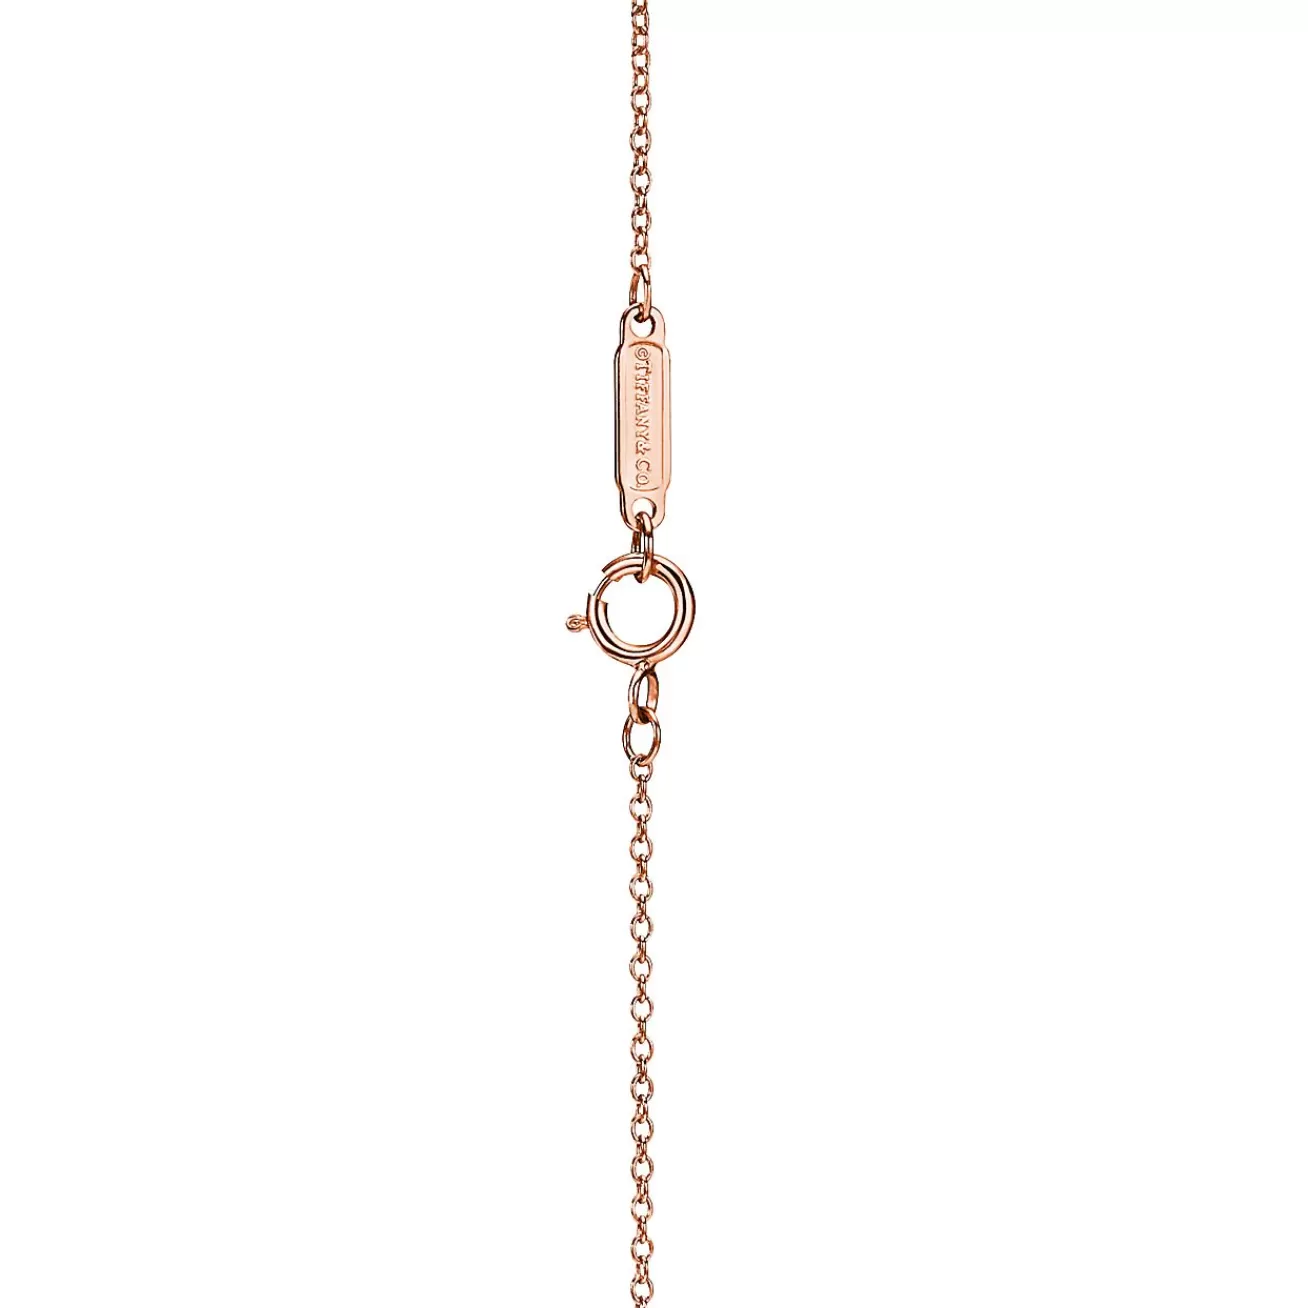 Tiffany & Co. Rose Gold Necklace Chain | ^ Necklaces & Pendants | Men's Jewelry